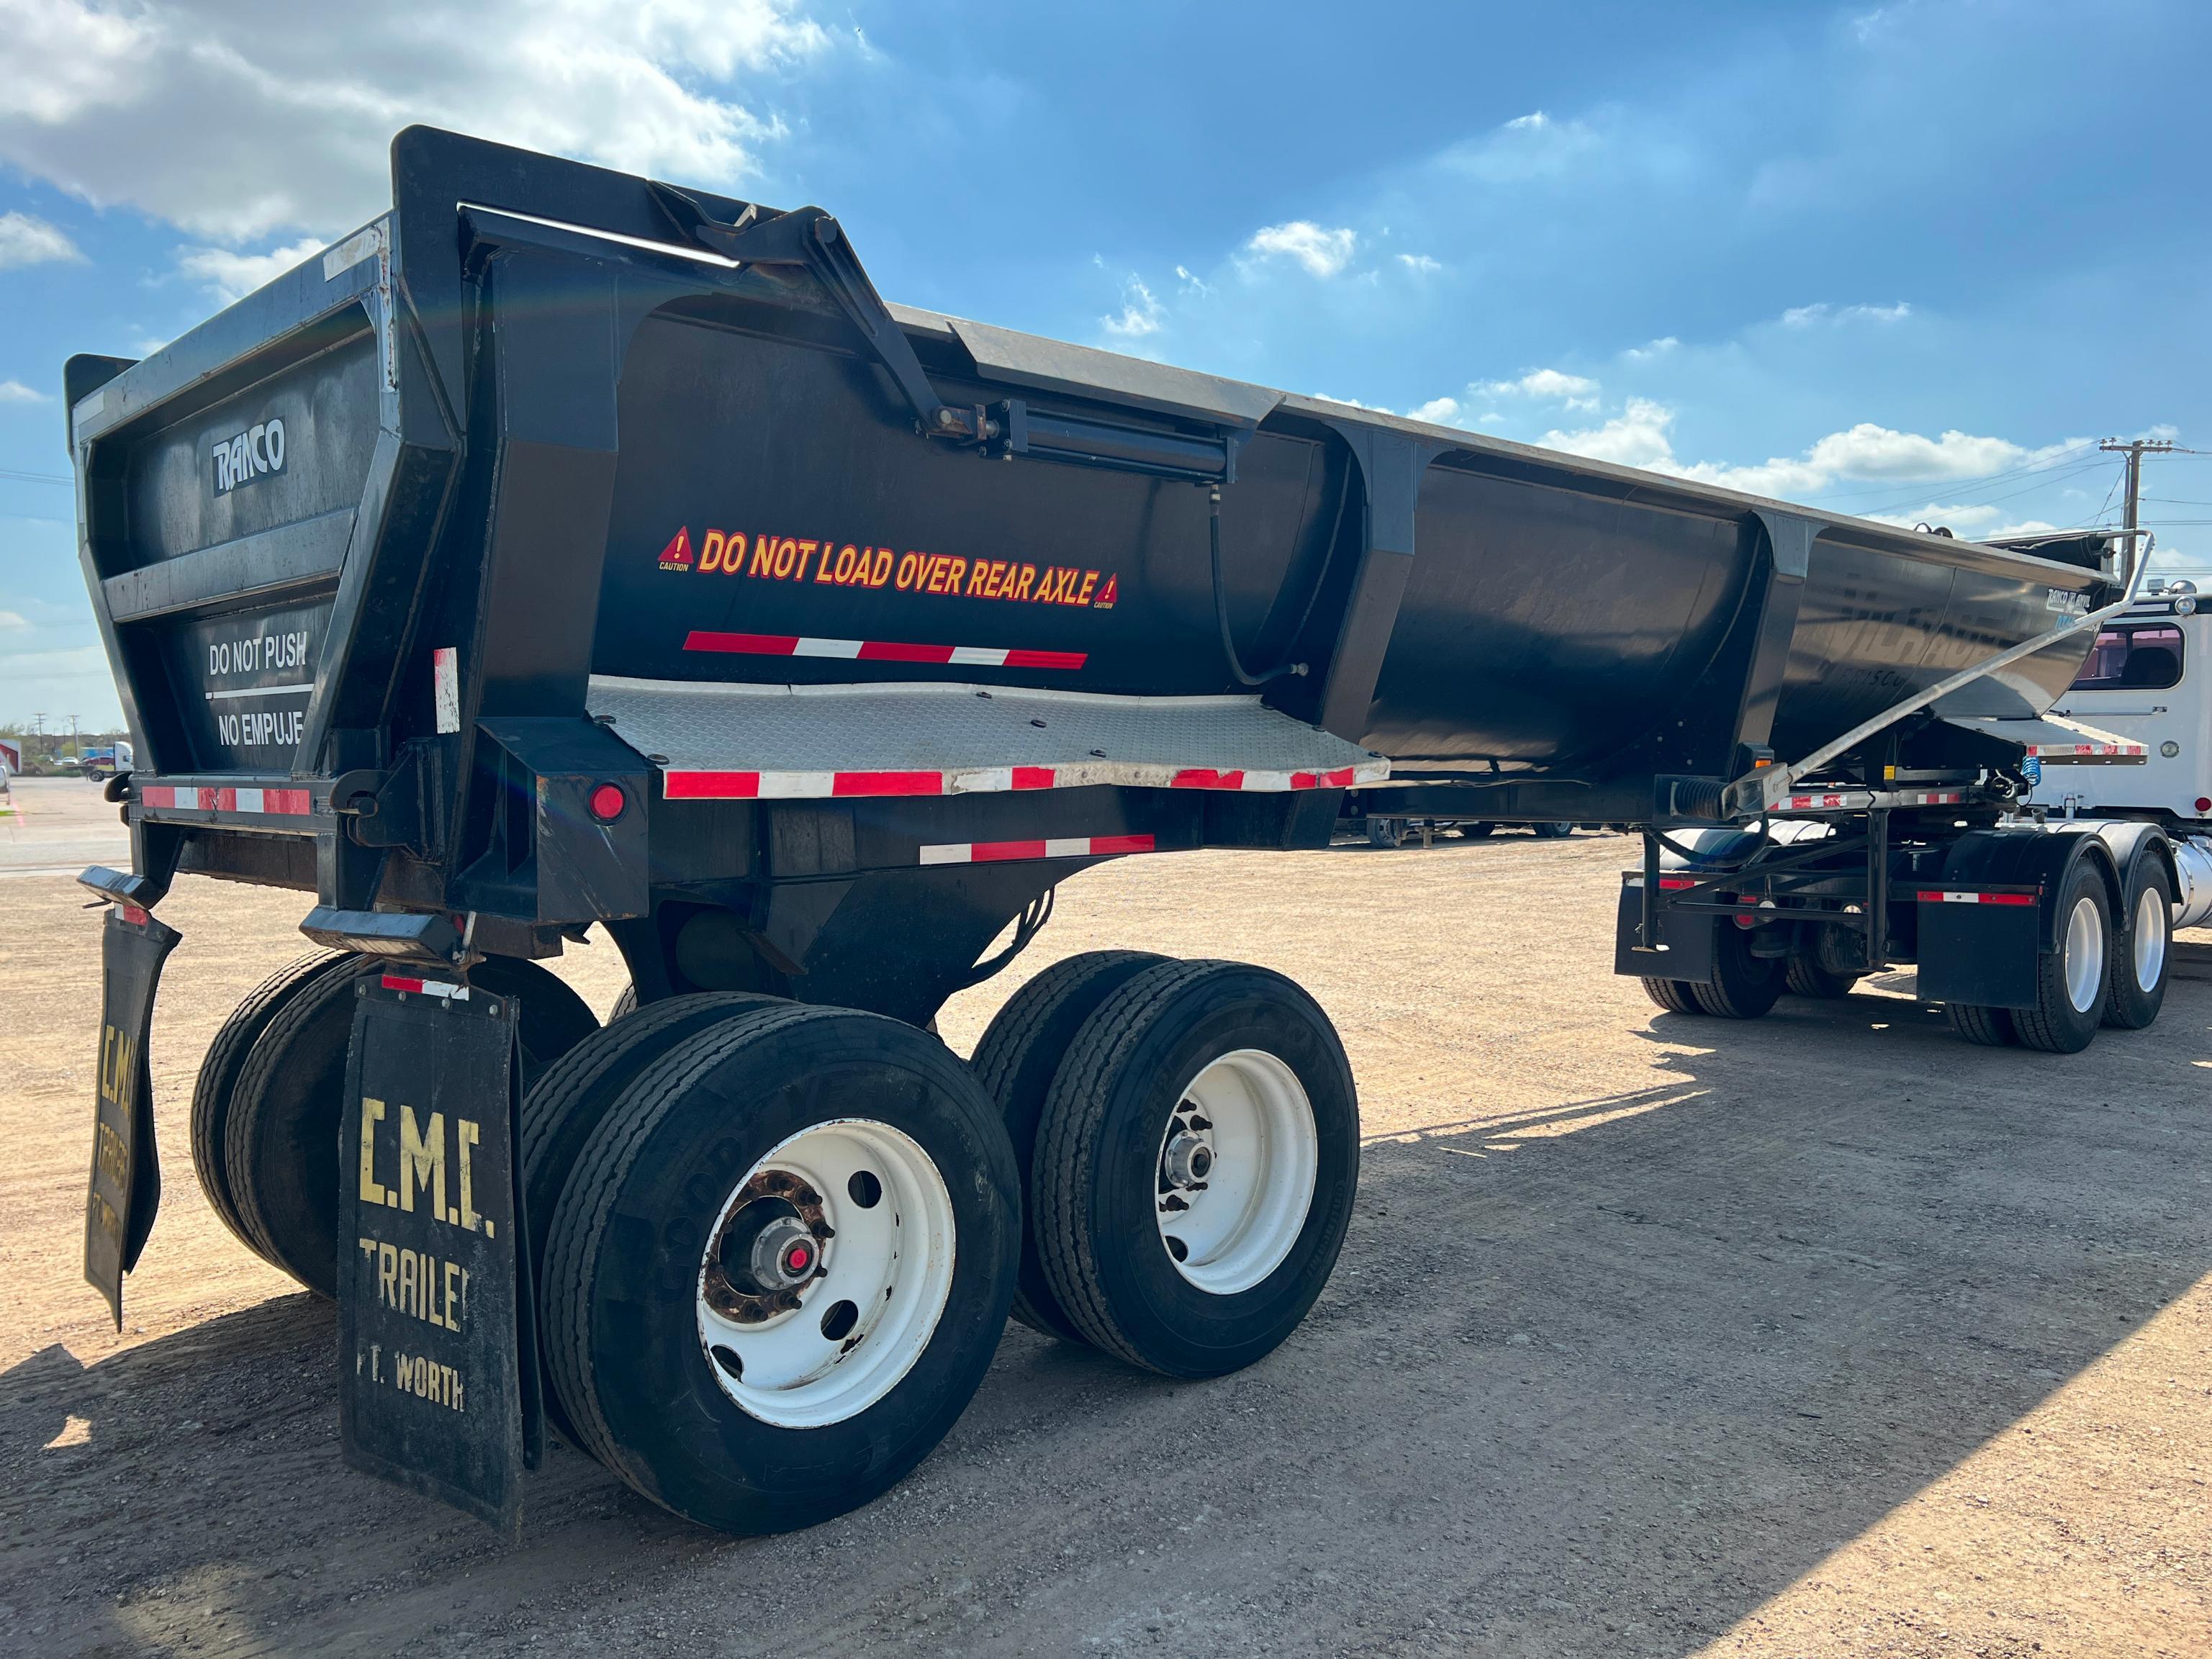 2017 RANCO ED26-34 DUMP TRAILER VN:1UNSD3420HL153142 equipped with 34ft. Dump body, 26 yard